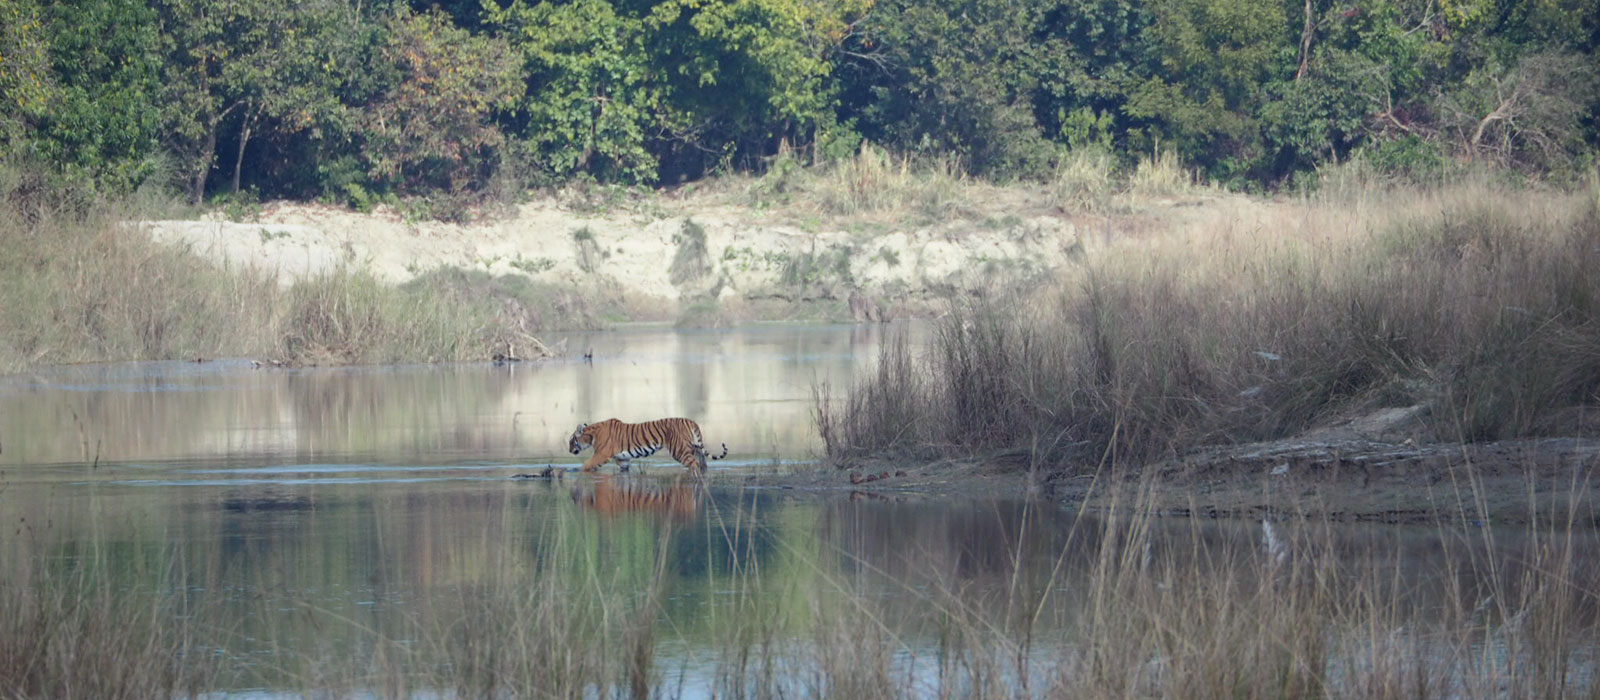 Tiger tracking tour in Bardia